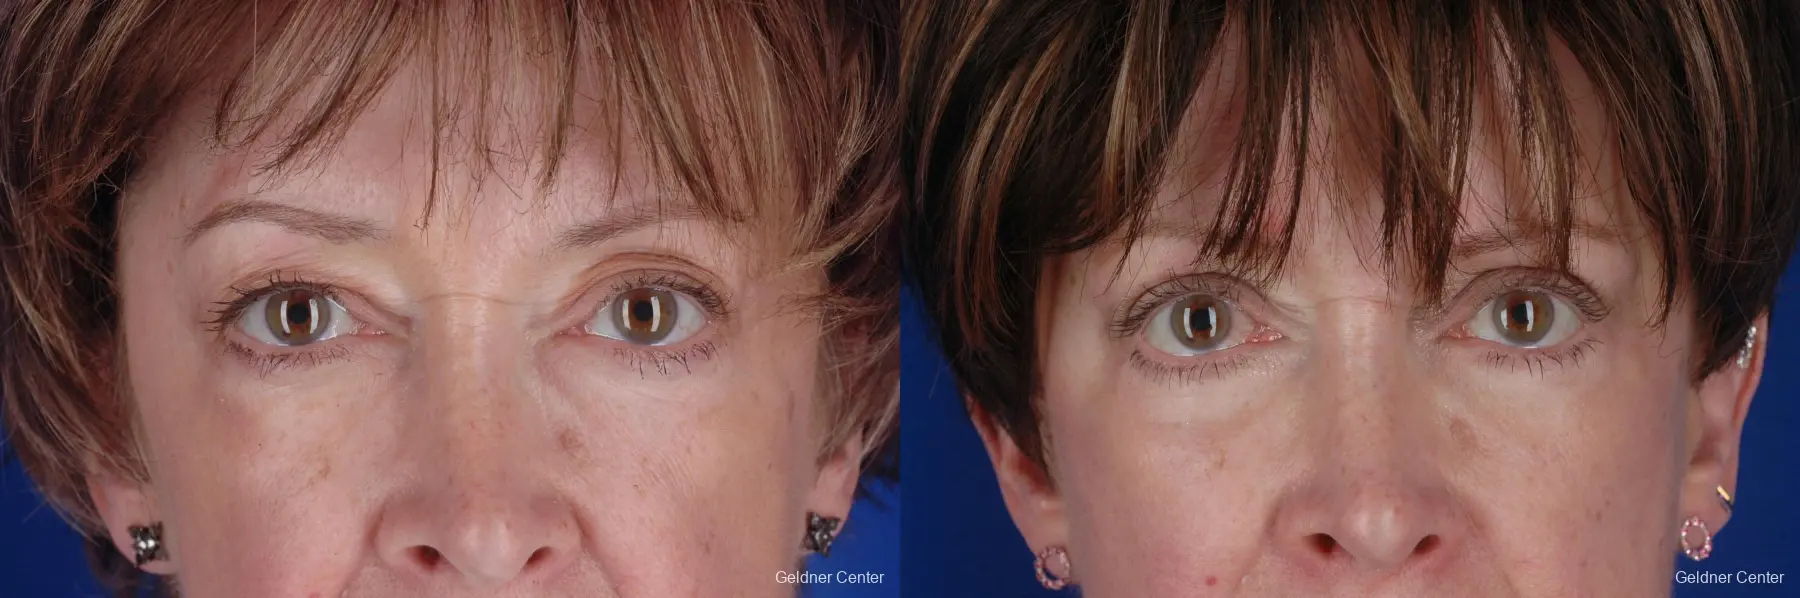 Eyelid Lift Streeterville, Chicago 2396 - Before and After